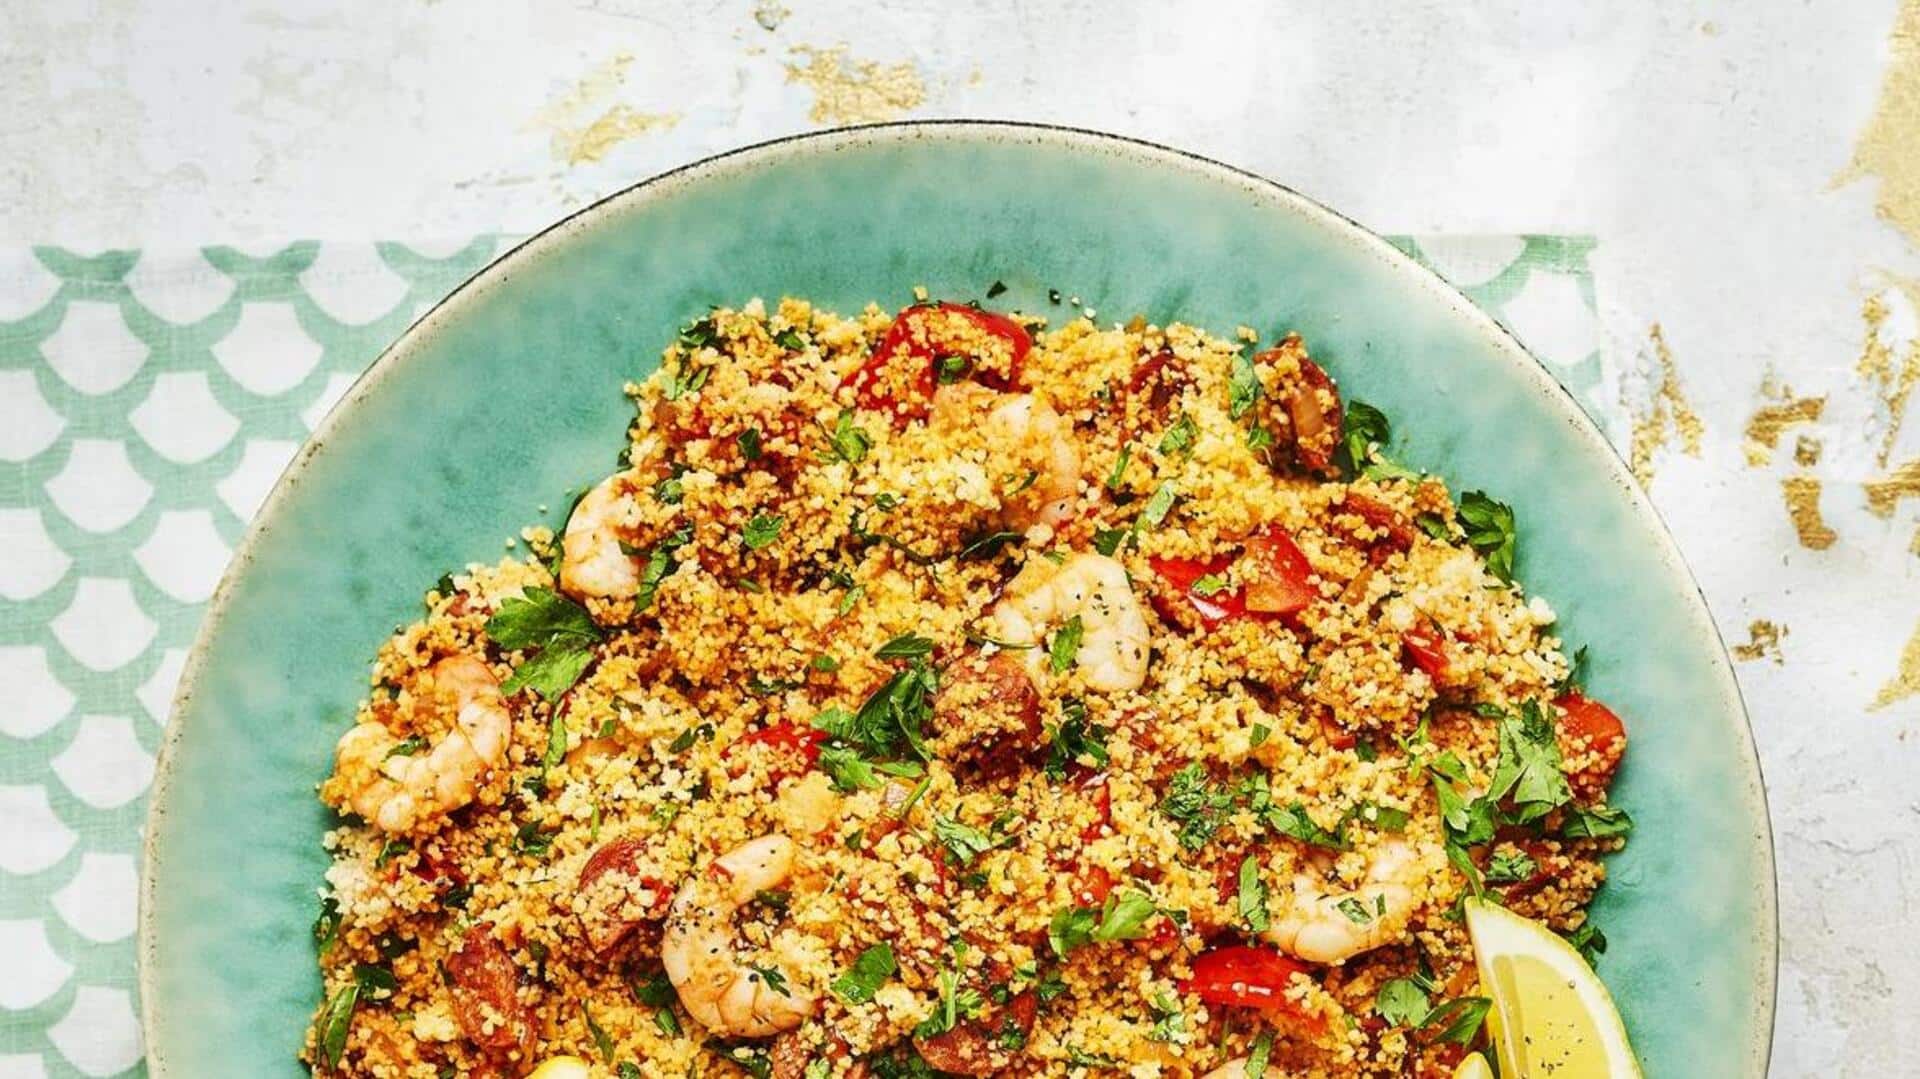 Try this fusion Moroccan-Spanish couscous paella recipe